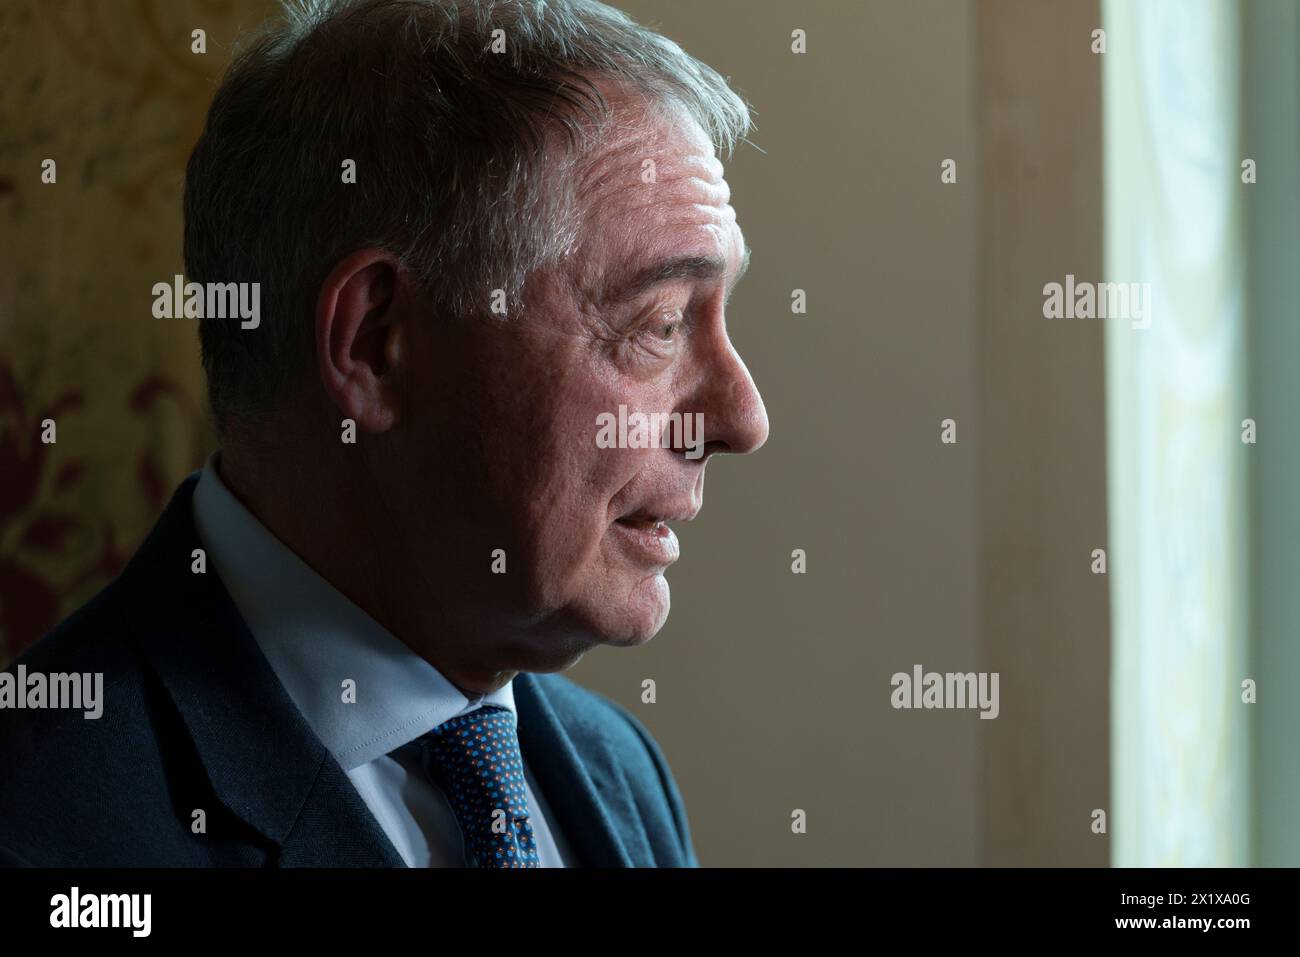 Rome, Italy, In the photo Adolfo Urso (Minister of Enterprises and Made in Italy). EDITORIAL USAGE ONLY! NOT FOR COMMERCIAL USAGE! Stock Photo